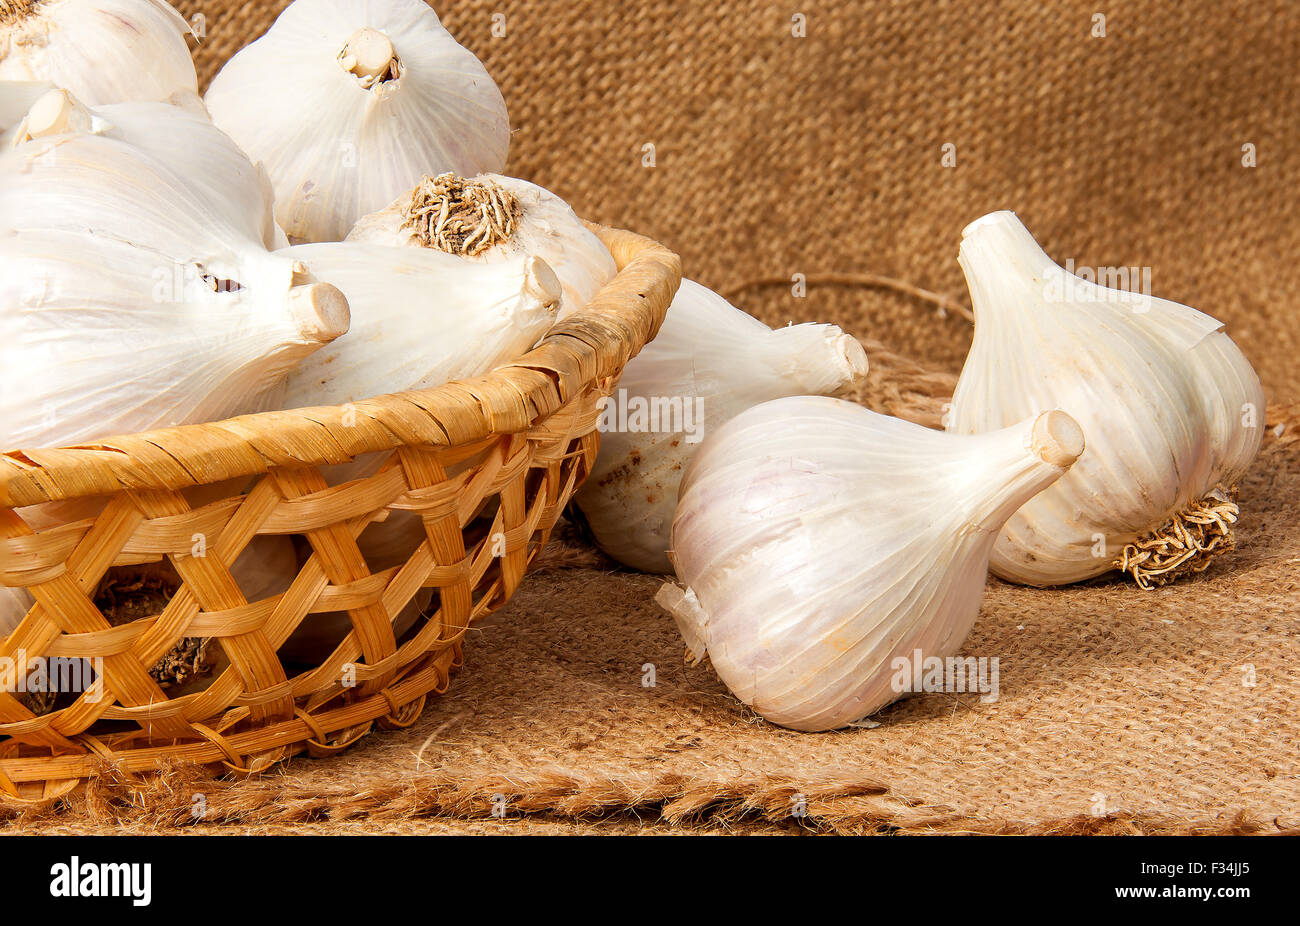 Whole head of garlic in a wicker basket on sackcloth Stock Photo